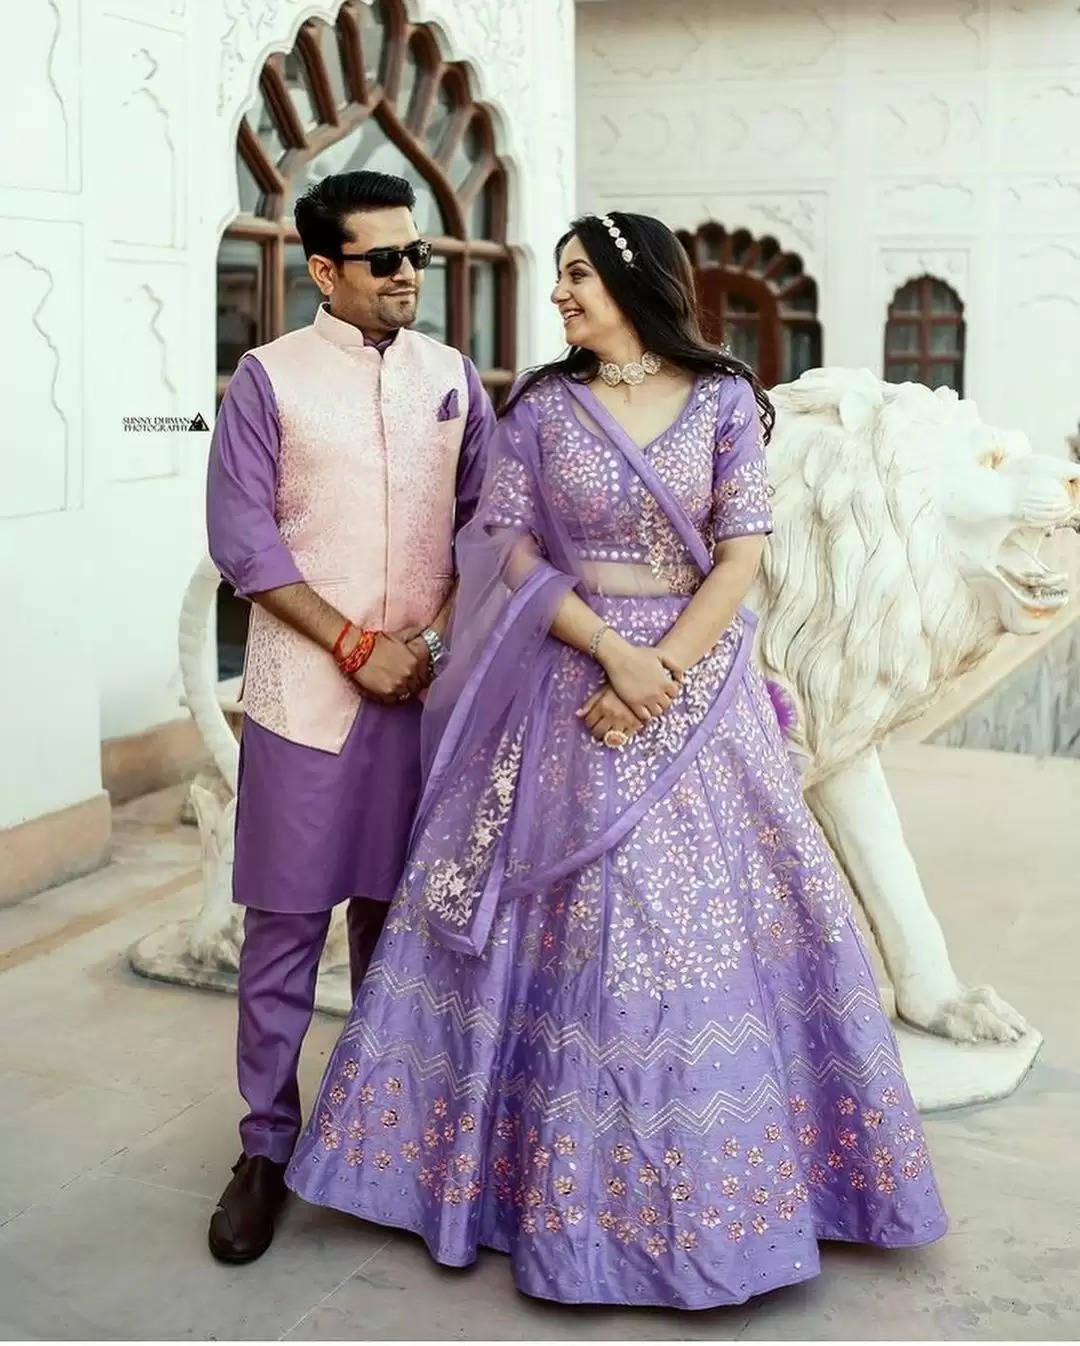 Swooning Over These Actual Brides Rocking Sheeshpatti On Their D-Day!